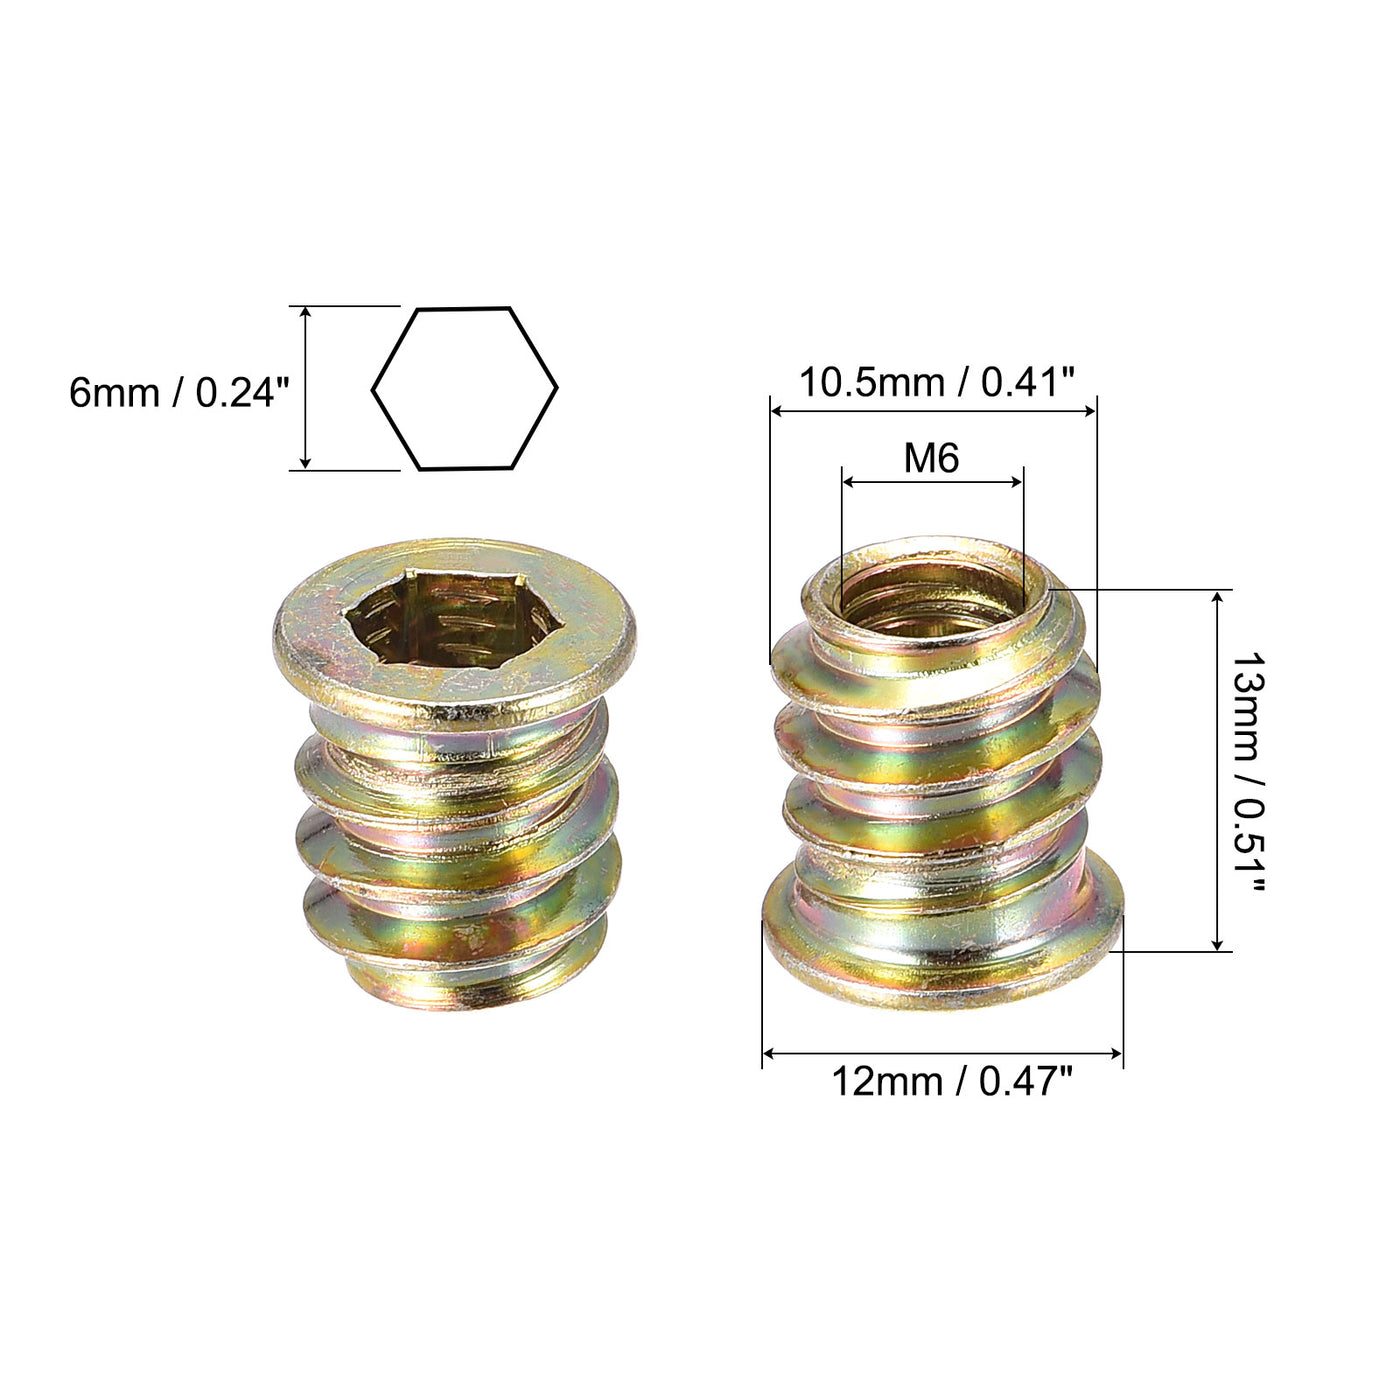 uxcell Uxcell M6x13mm Threaded Inserts for Wood Hex Socket Drive Furniture Screw-in Nut 24pcs